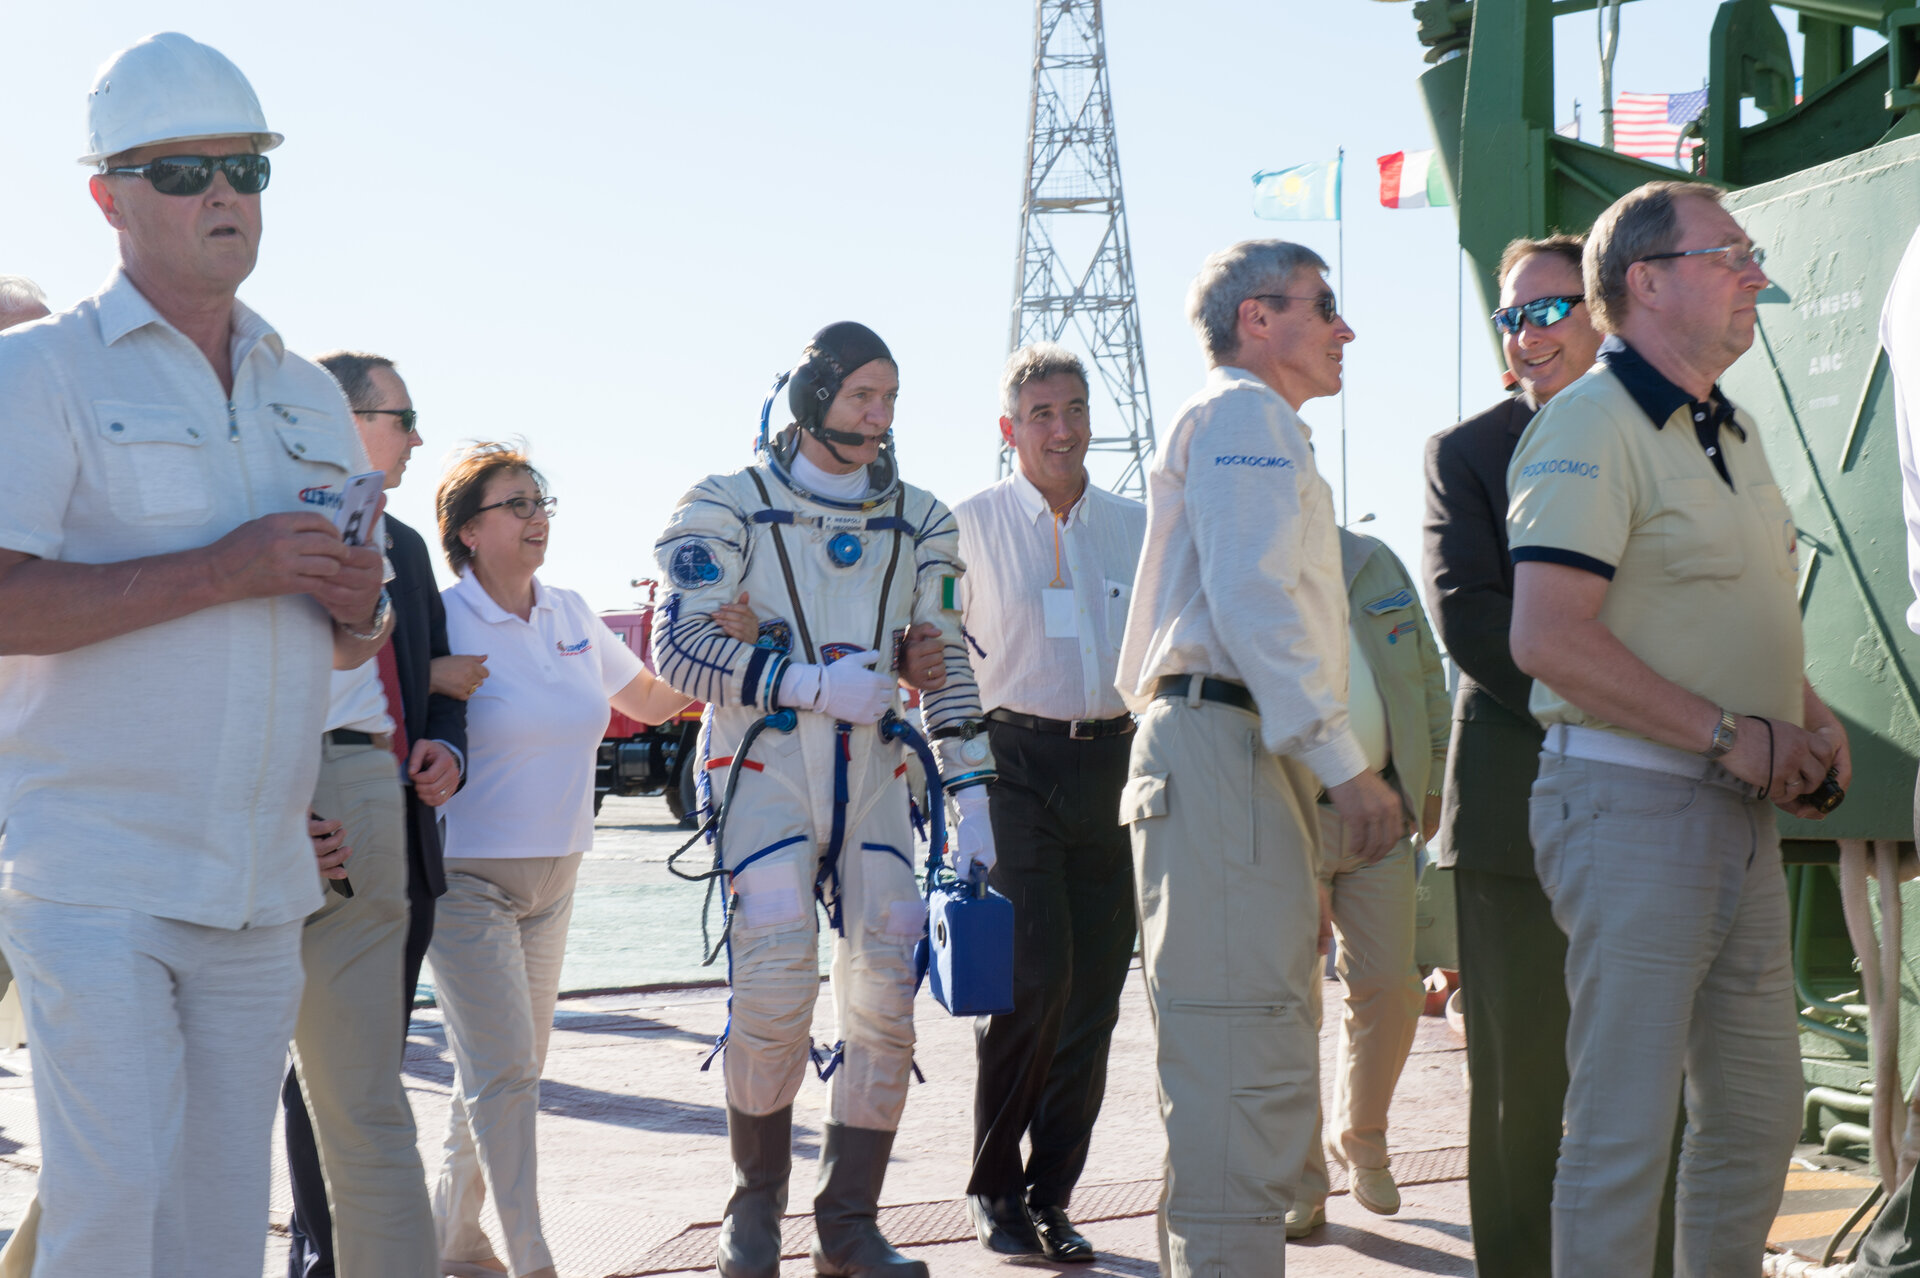 Paolo Nespoli and Franco Ongaro walking to the launch pad